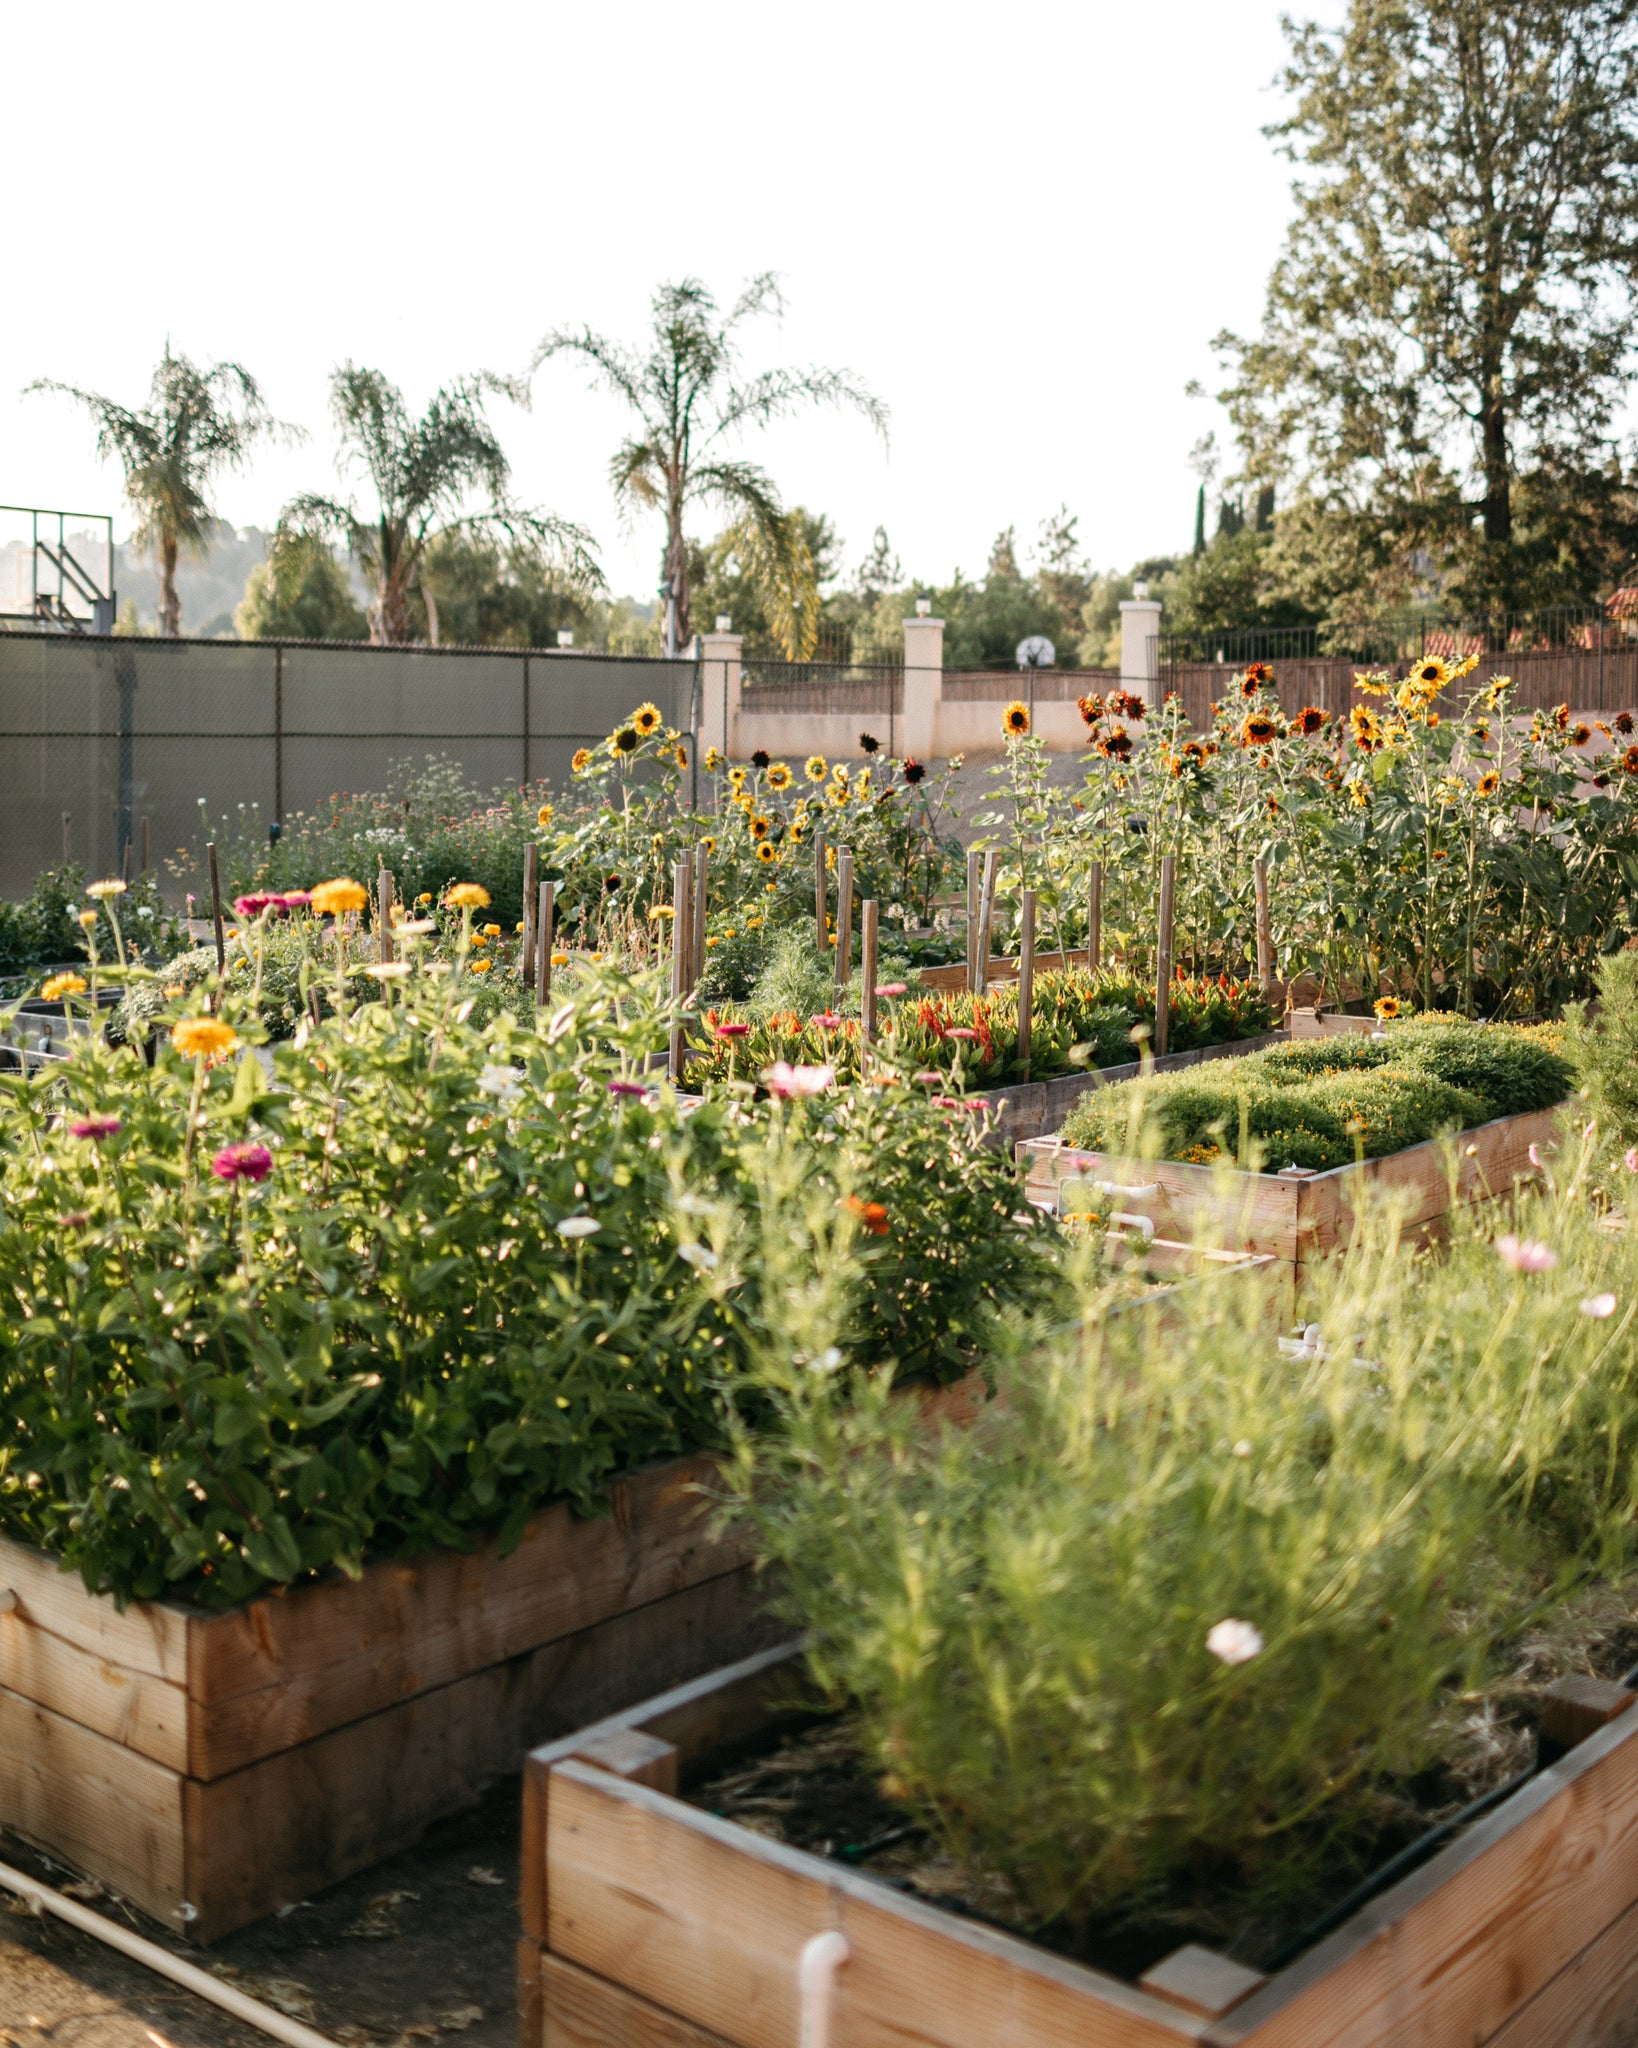 Raised bed planters at Native Poppy's flower farm